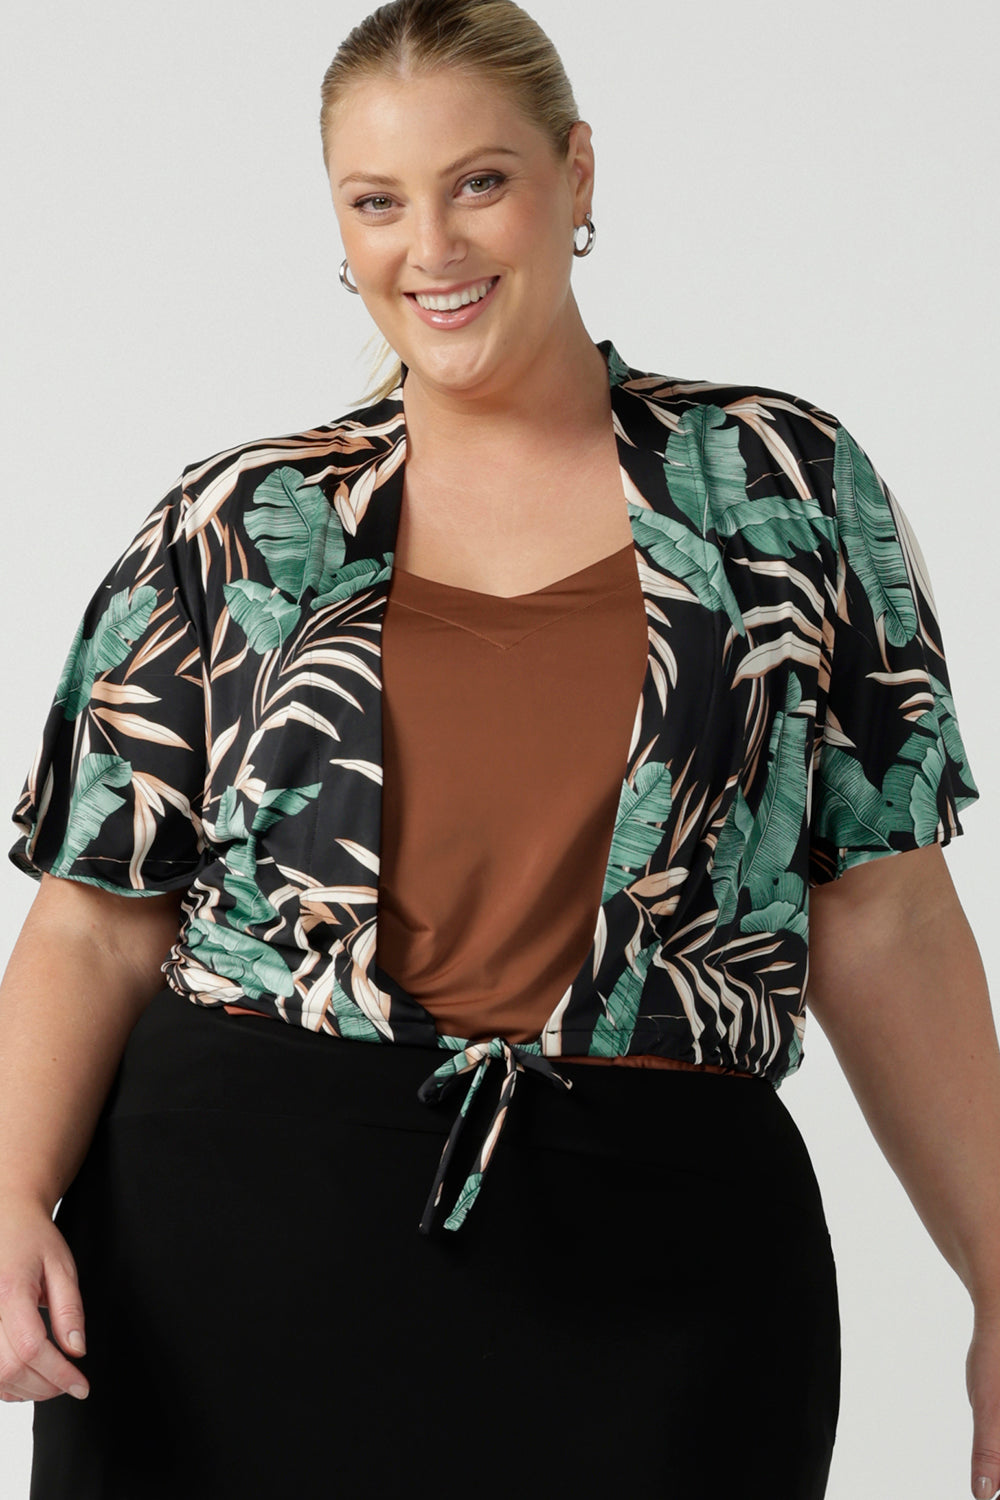 Tropical printed shrug cardigan. Featuring a leaf print on a black background. Ruched waist tie detail tie detail. Great layering piece. Ladies inclusive sizing. 